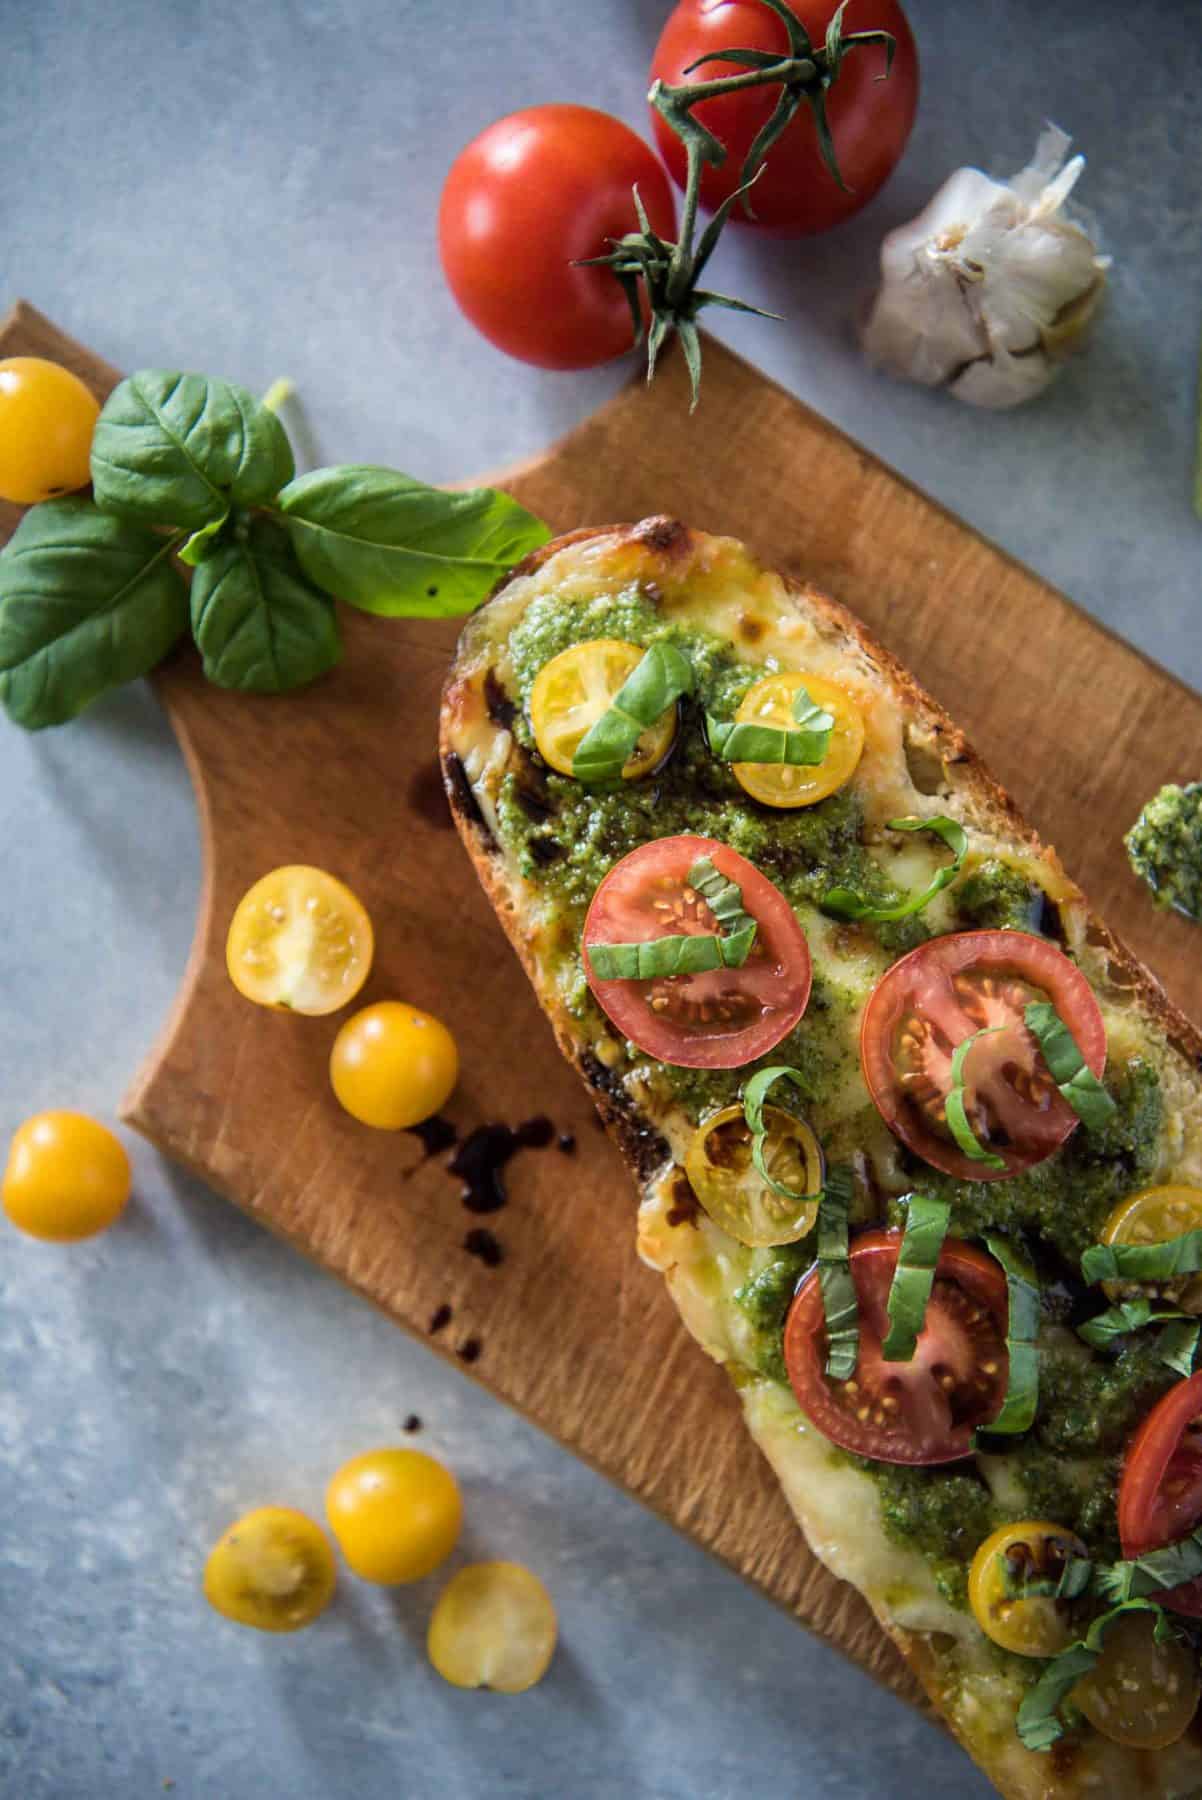 Whether you pair it with your favorite pasta dish or call it dinner by itself, this Caprese Garlic Bread with Arugula Pesto will please the palate of any lover of Italian cuisine!